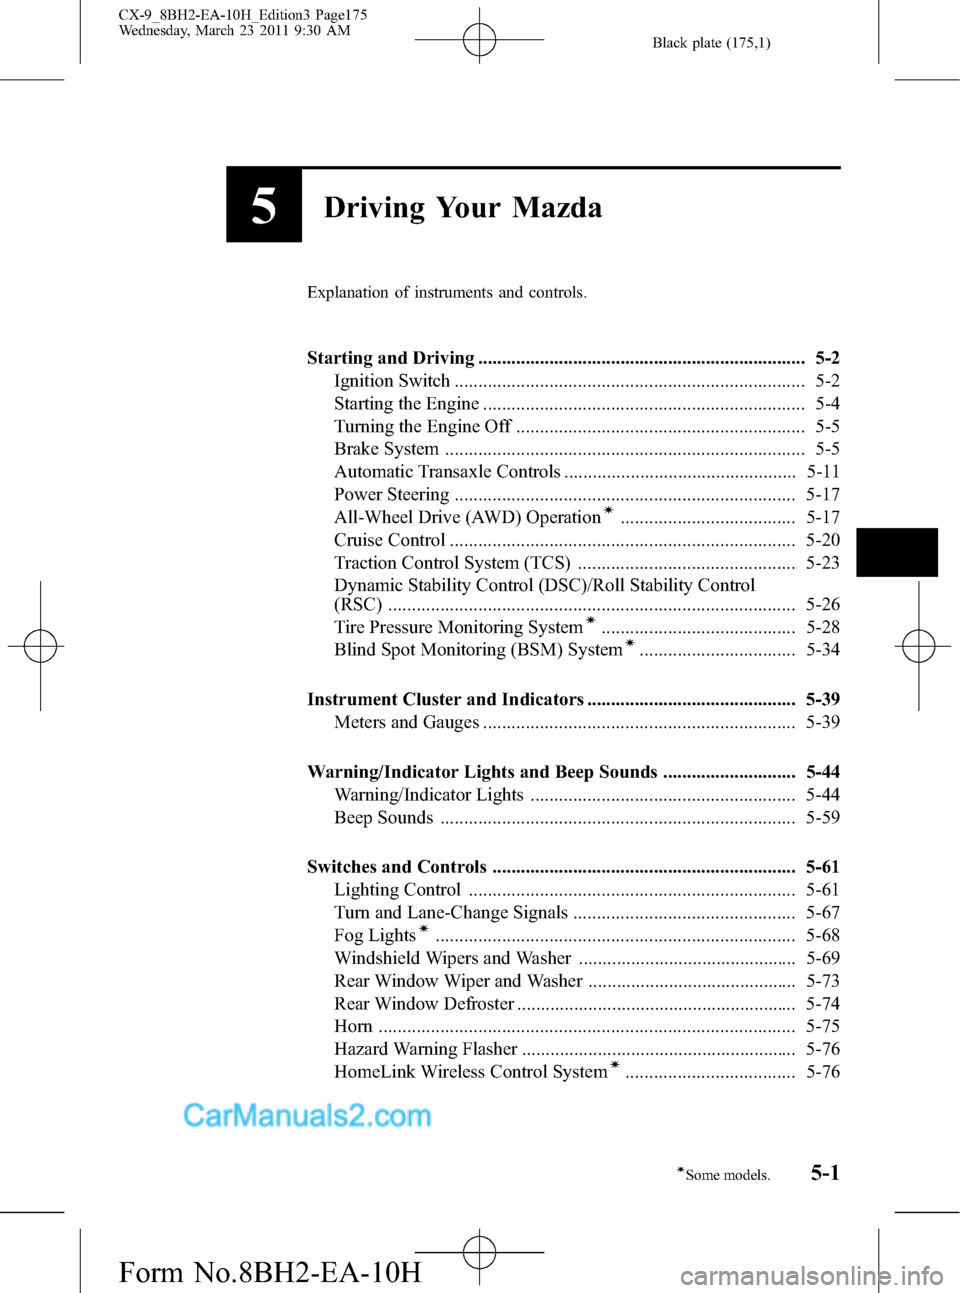 MAZDA MODEL CX-9 2011  Owners Manual (in English) Black plate (175,1)
5Driving Your Mazda
Explanation of instruments and controls.
Starting and Driving ..................................................................... 5-2
Ignition Switch ........